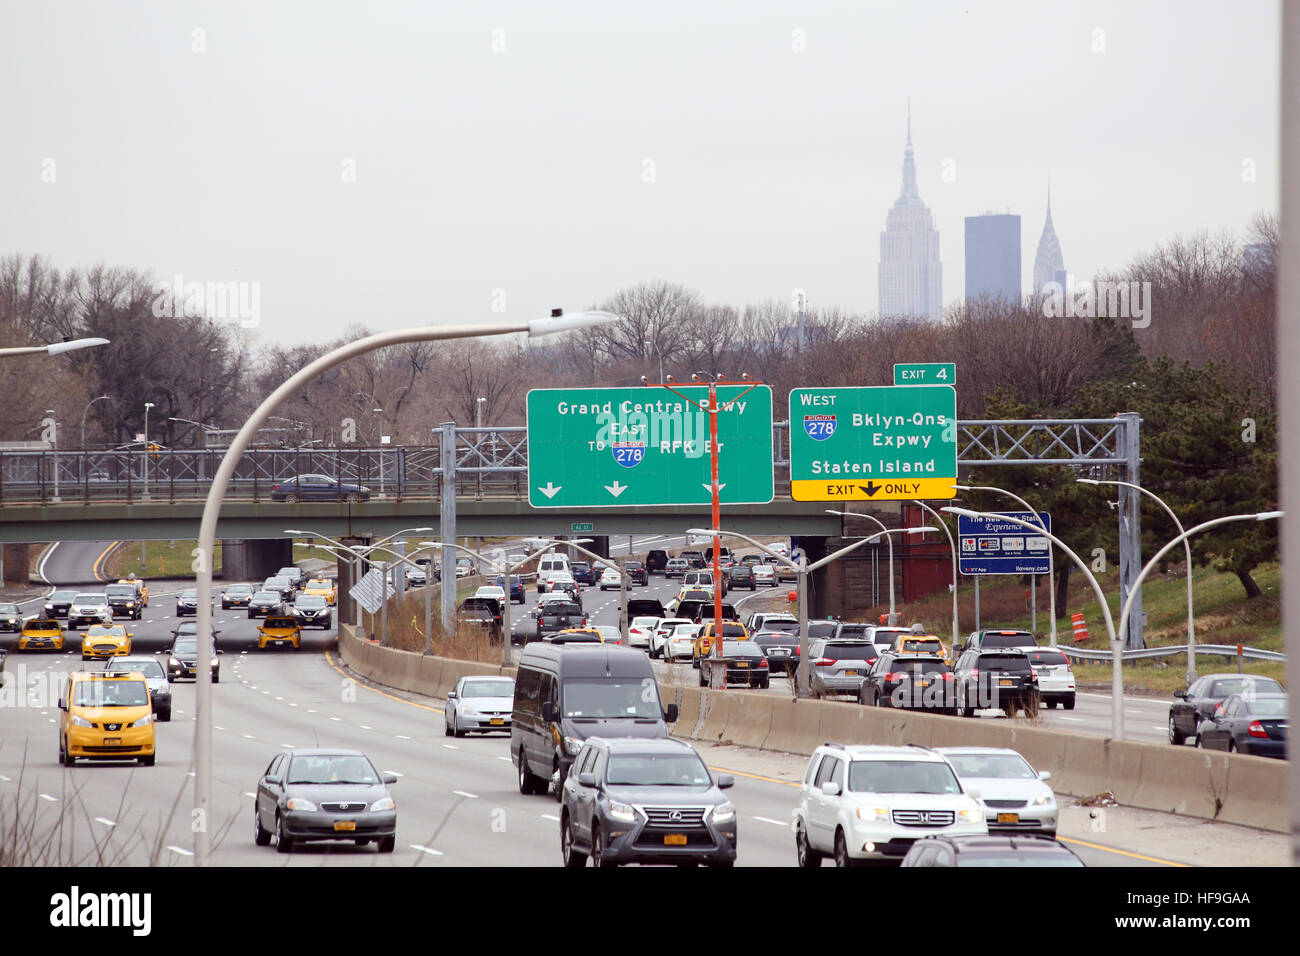 Light traffic on the Grand Central Parkway near Laguardia Airport